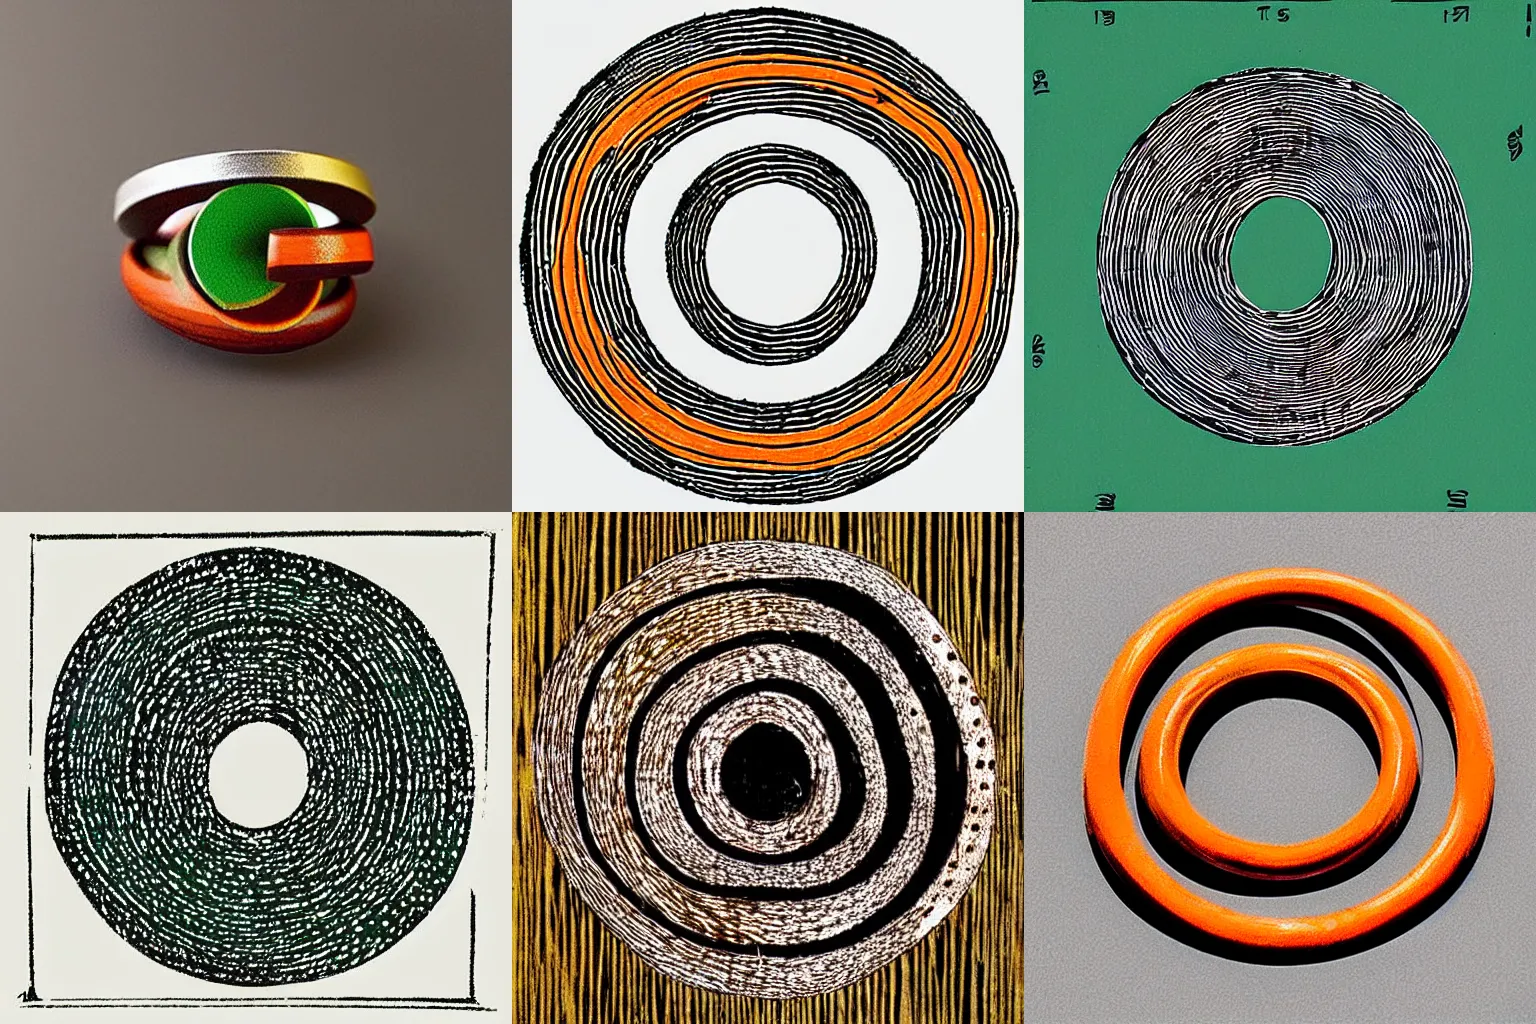 Prompt: “Infinitely small rings grow from the center of the circle, reach a maximum size, and then diminish again as they reach the outer circumference, woodcut in orange, green, and black.”